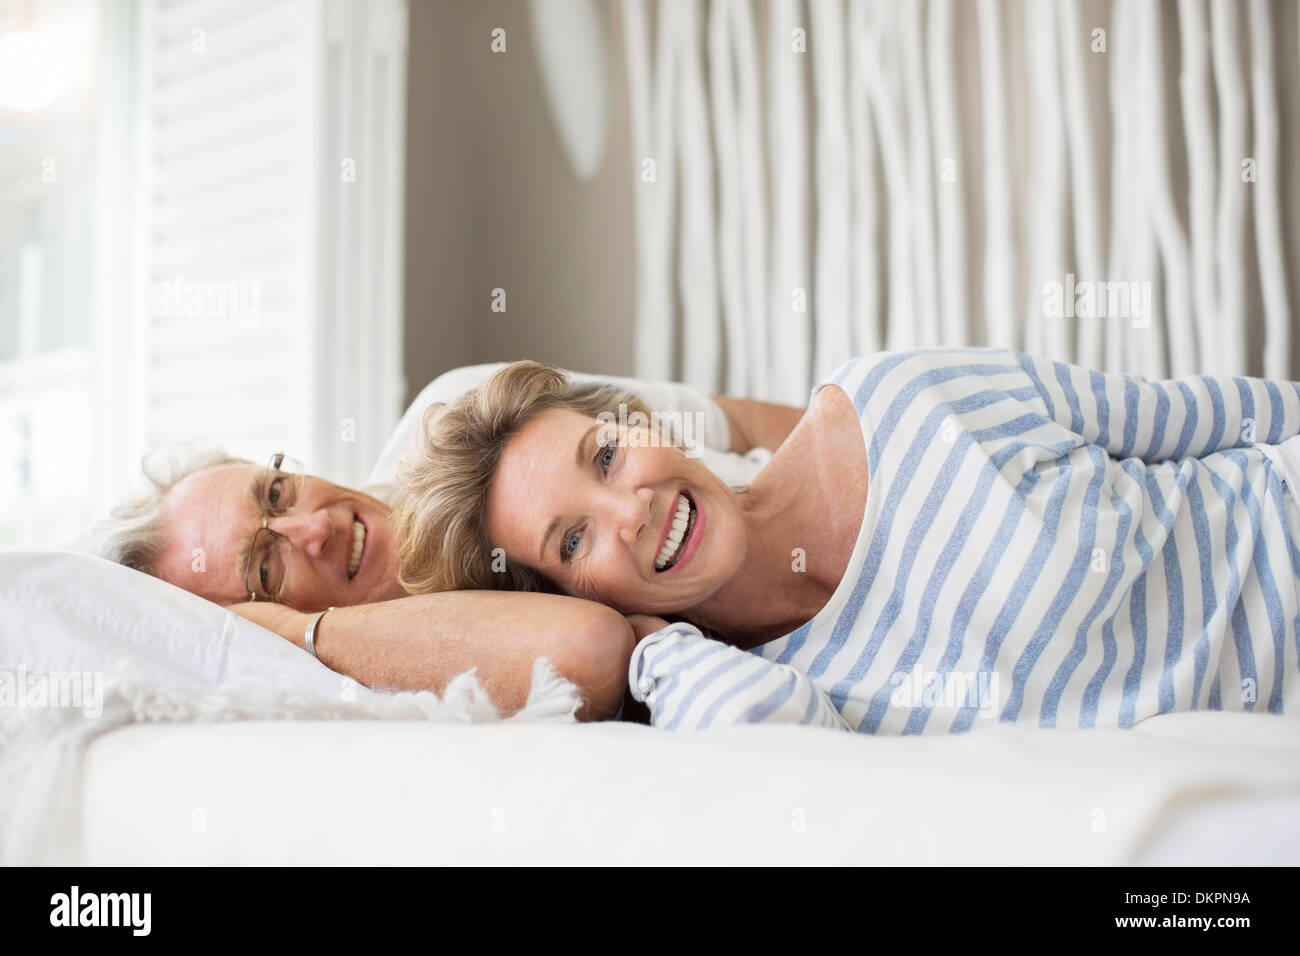 Older couple relaxing together on bed Stock Photo